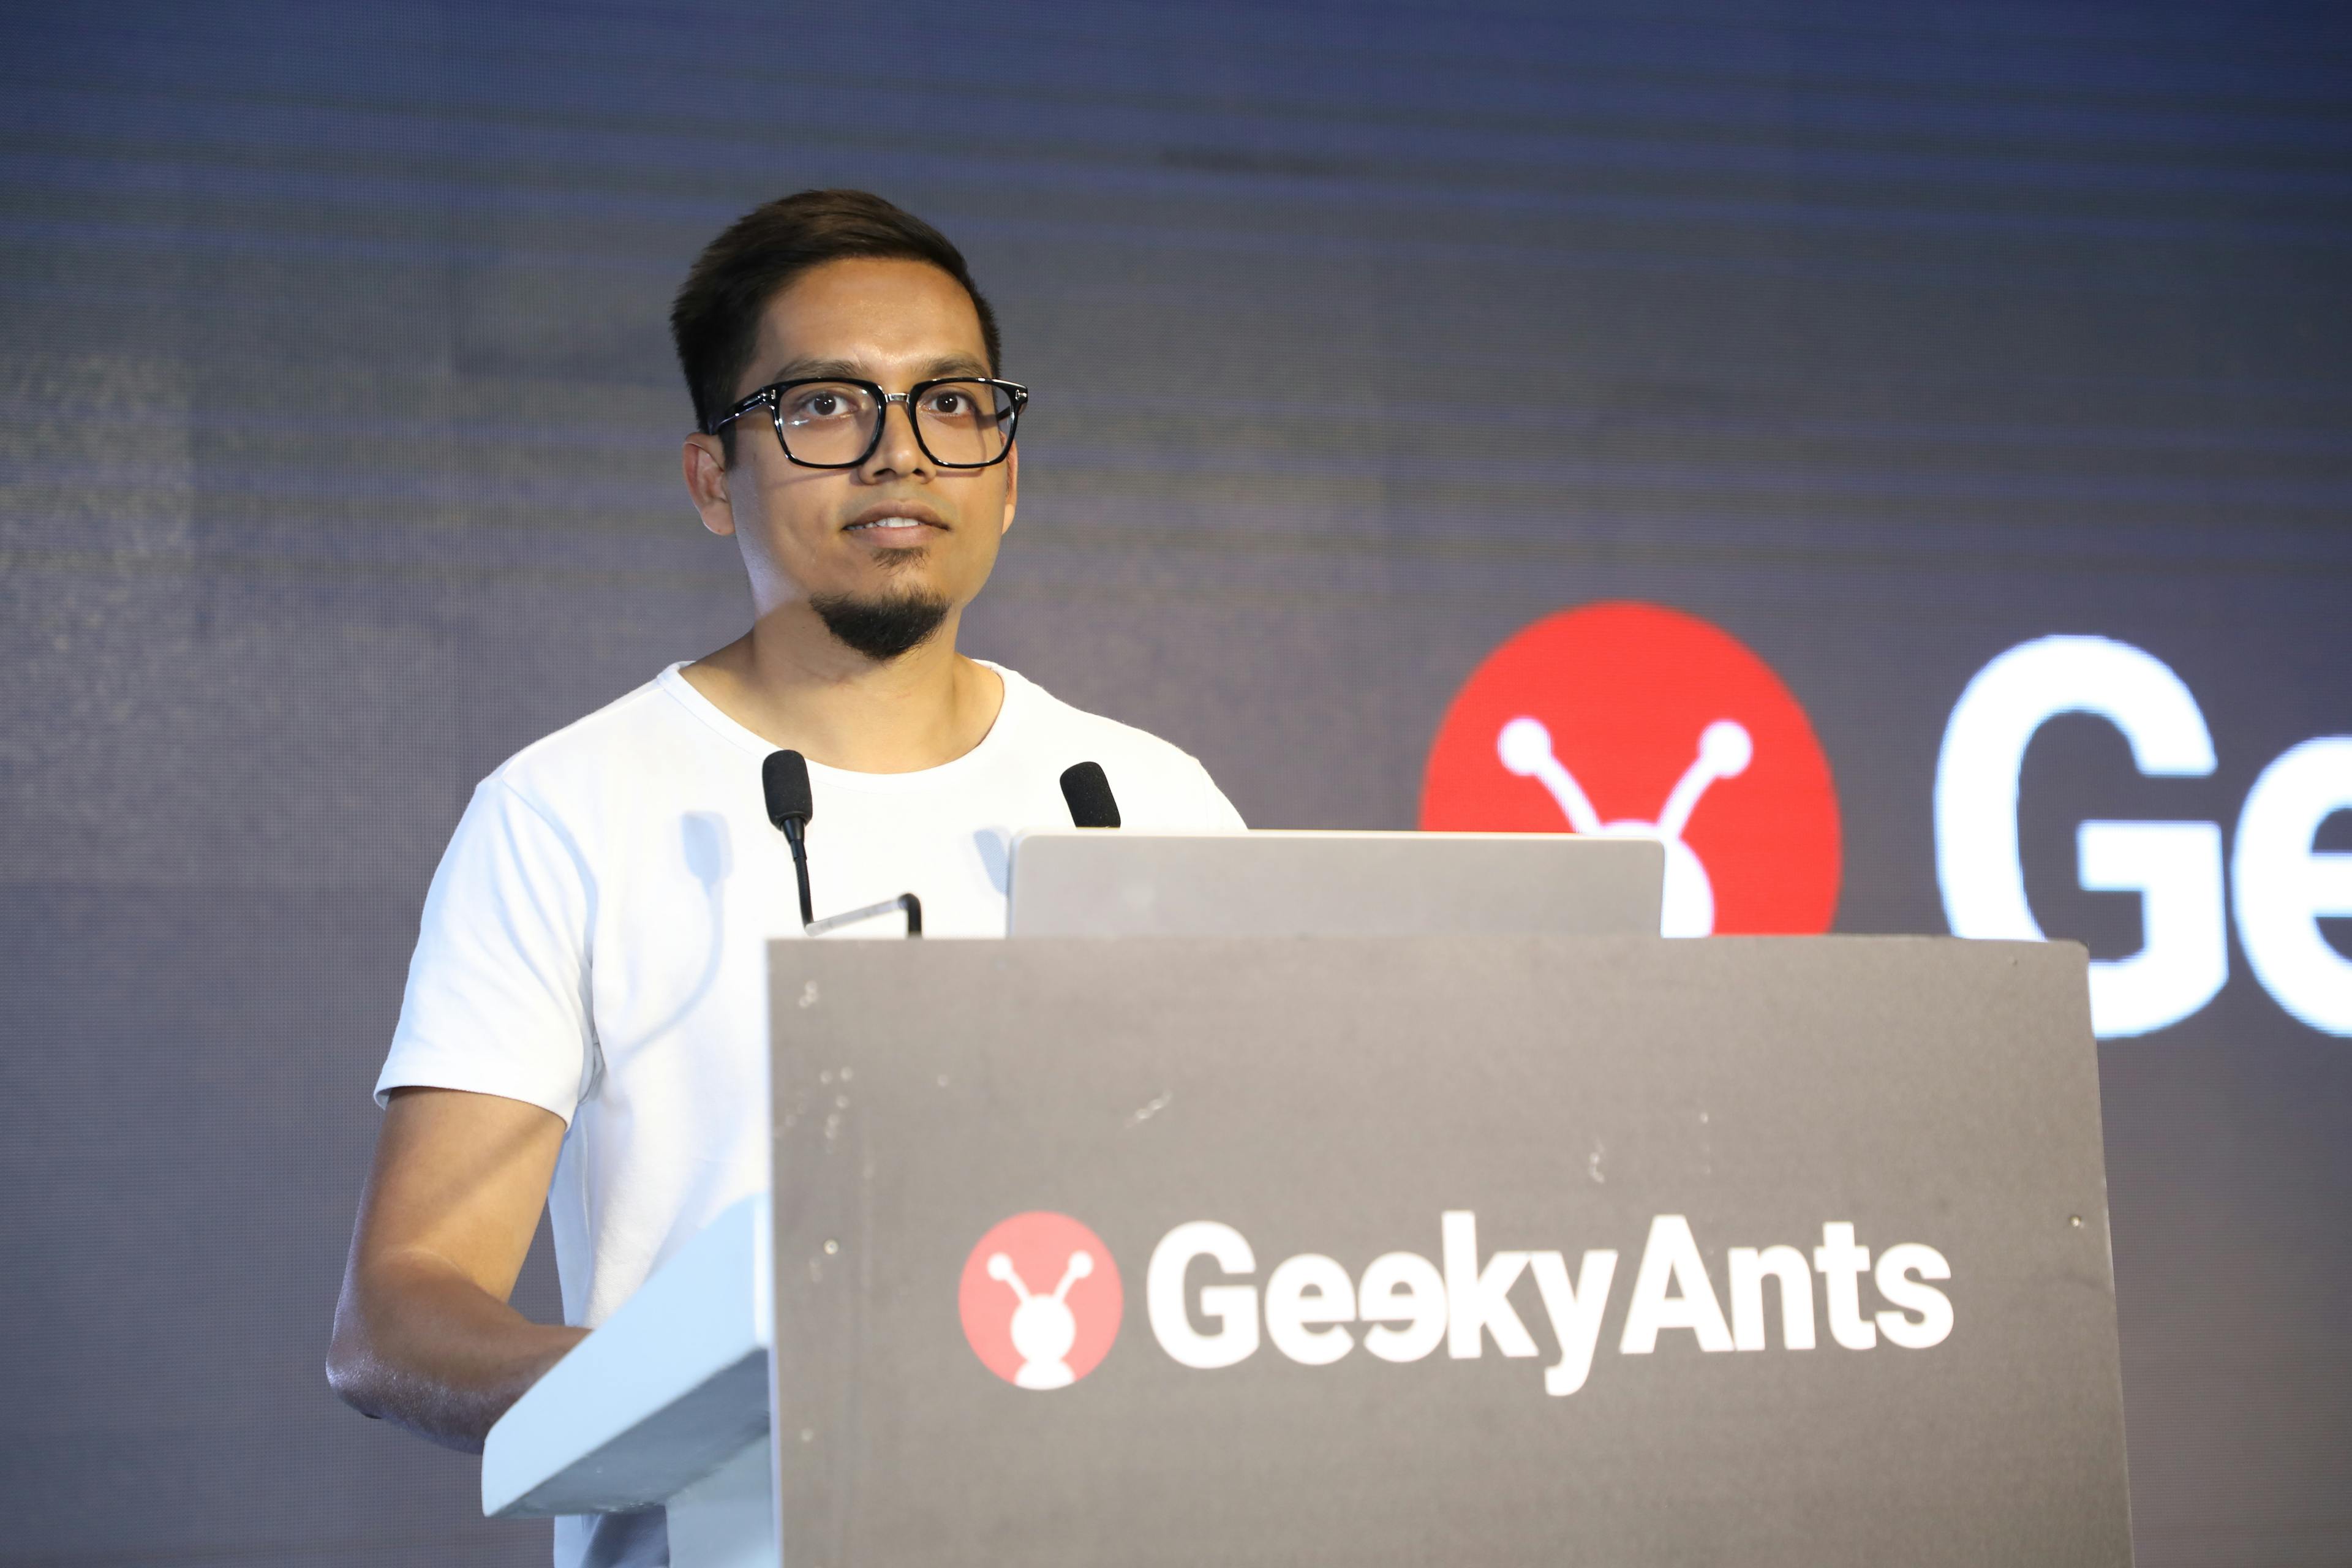 Our Chief Geek, Sanket Sahu, sharing stories on the stage